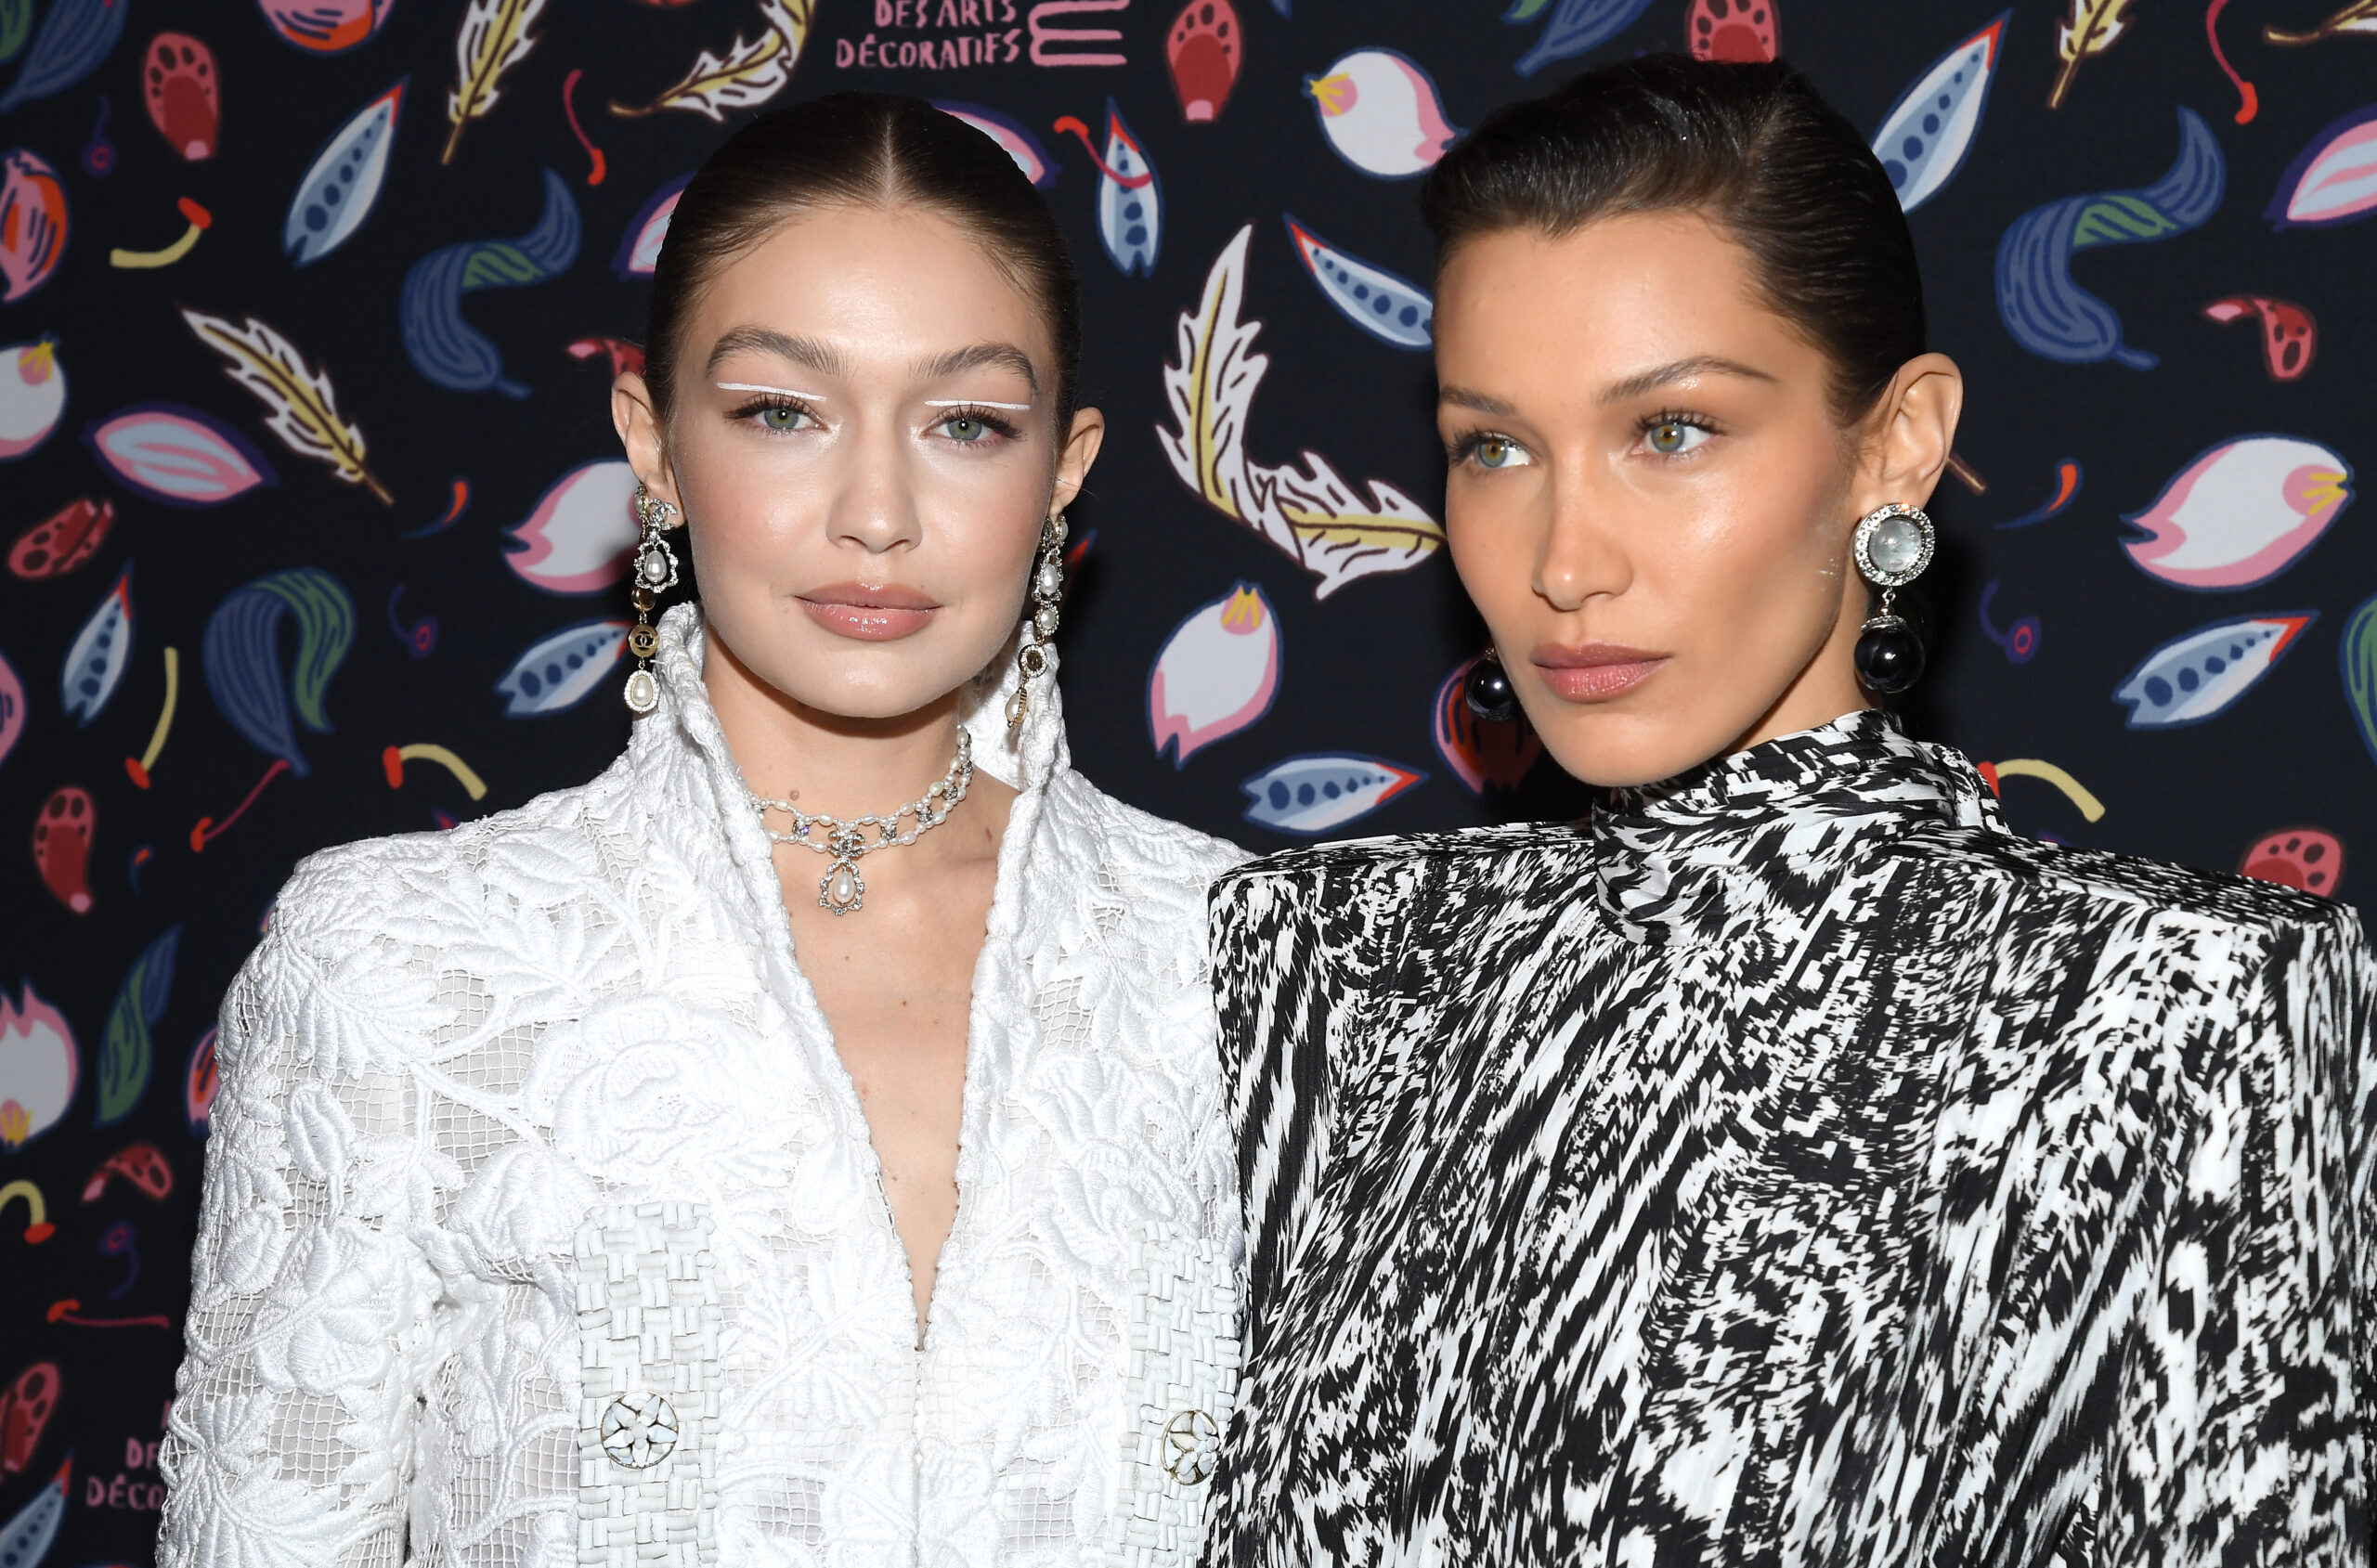 Which Supermodel Sister Has The Highest Net Worth?